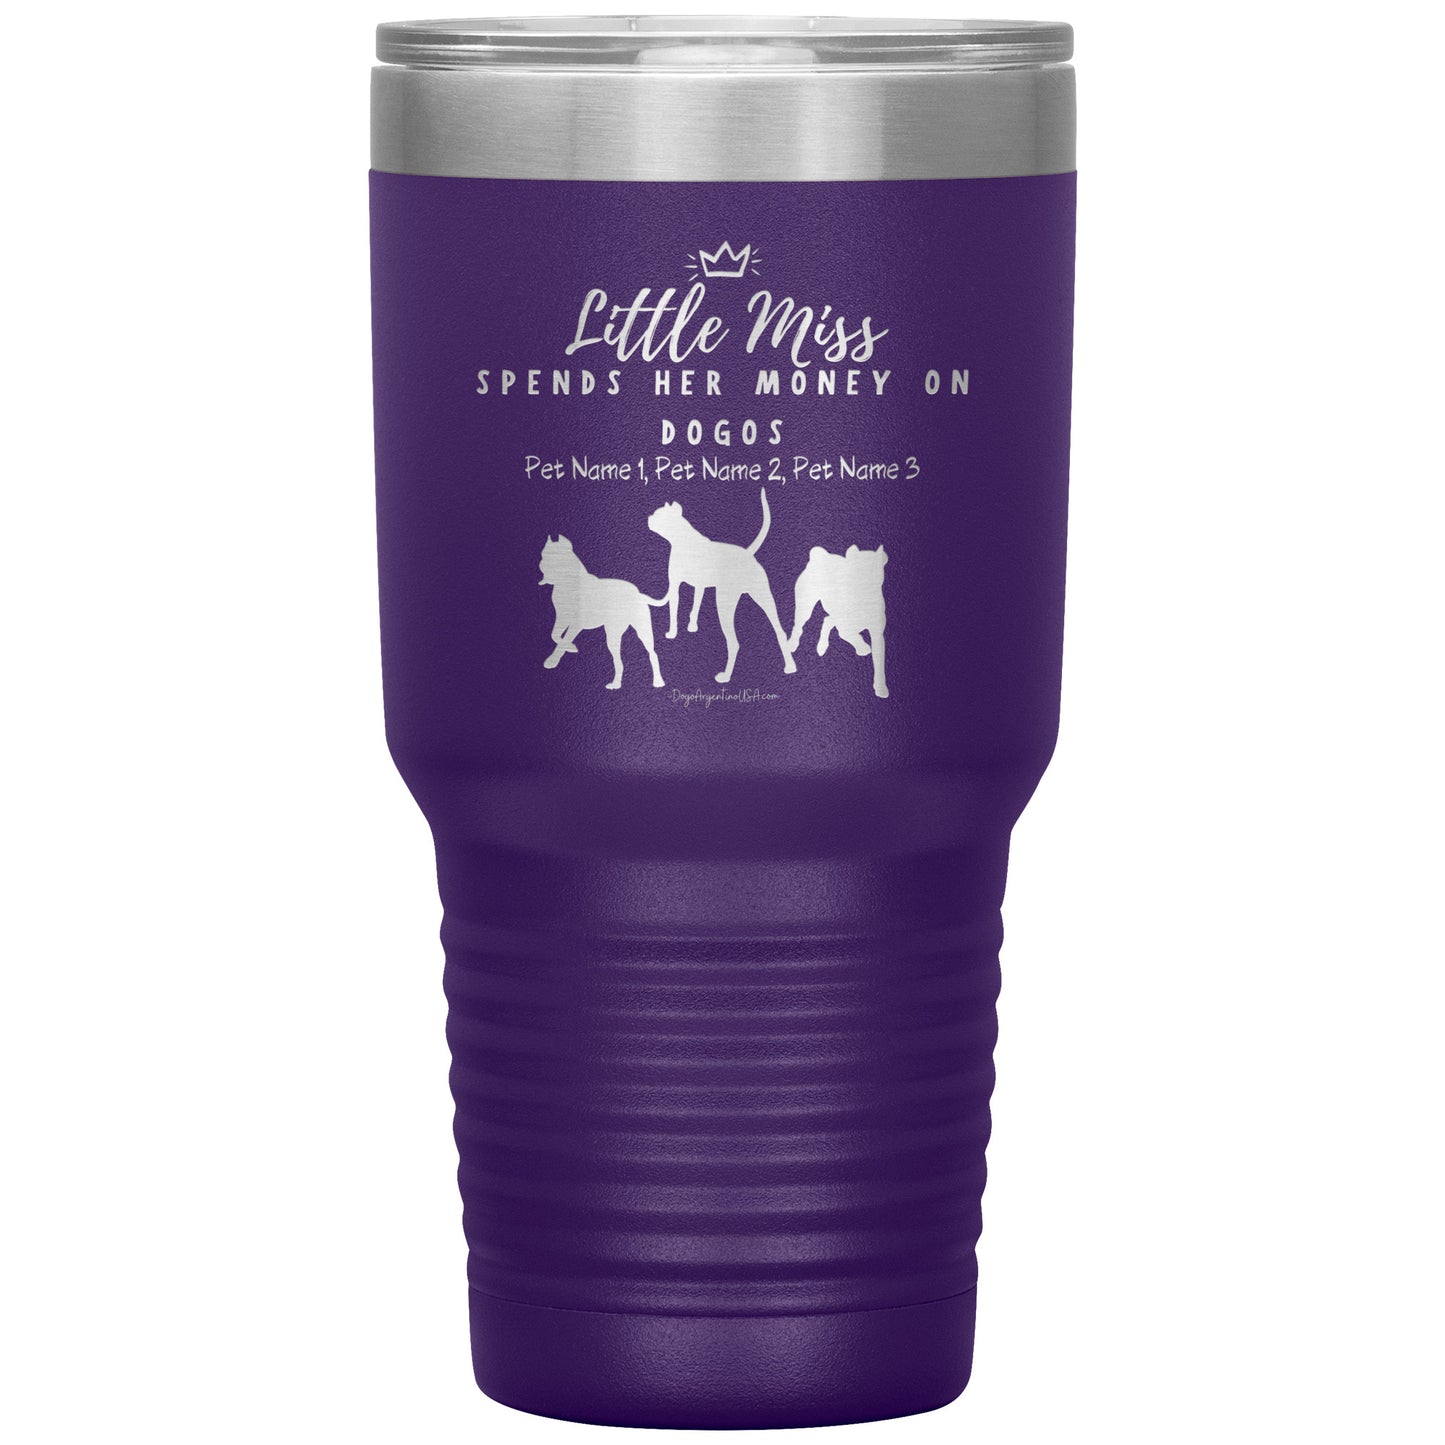 Little Miss Spends Her Money On Dogo Argentinos 3 Pet Personalized Laser Etched Tumbler 30oz